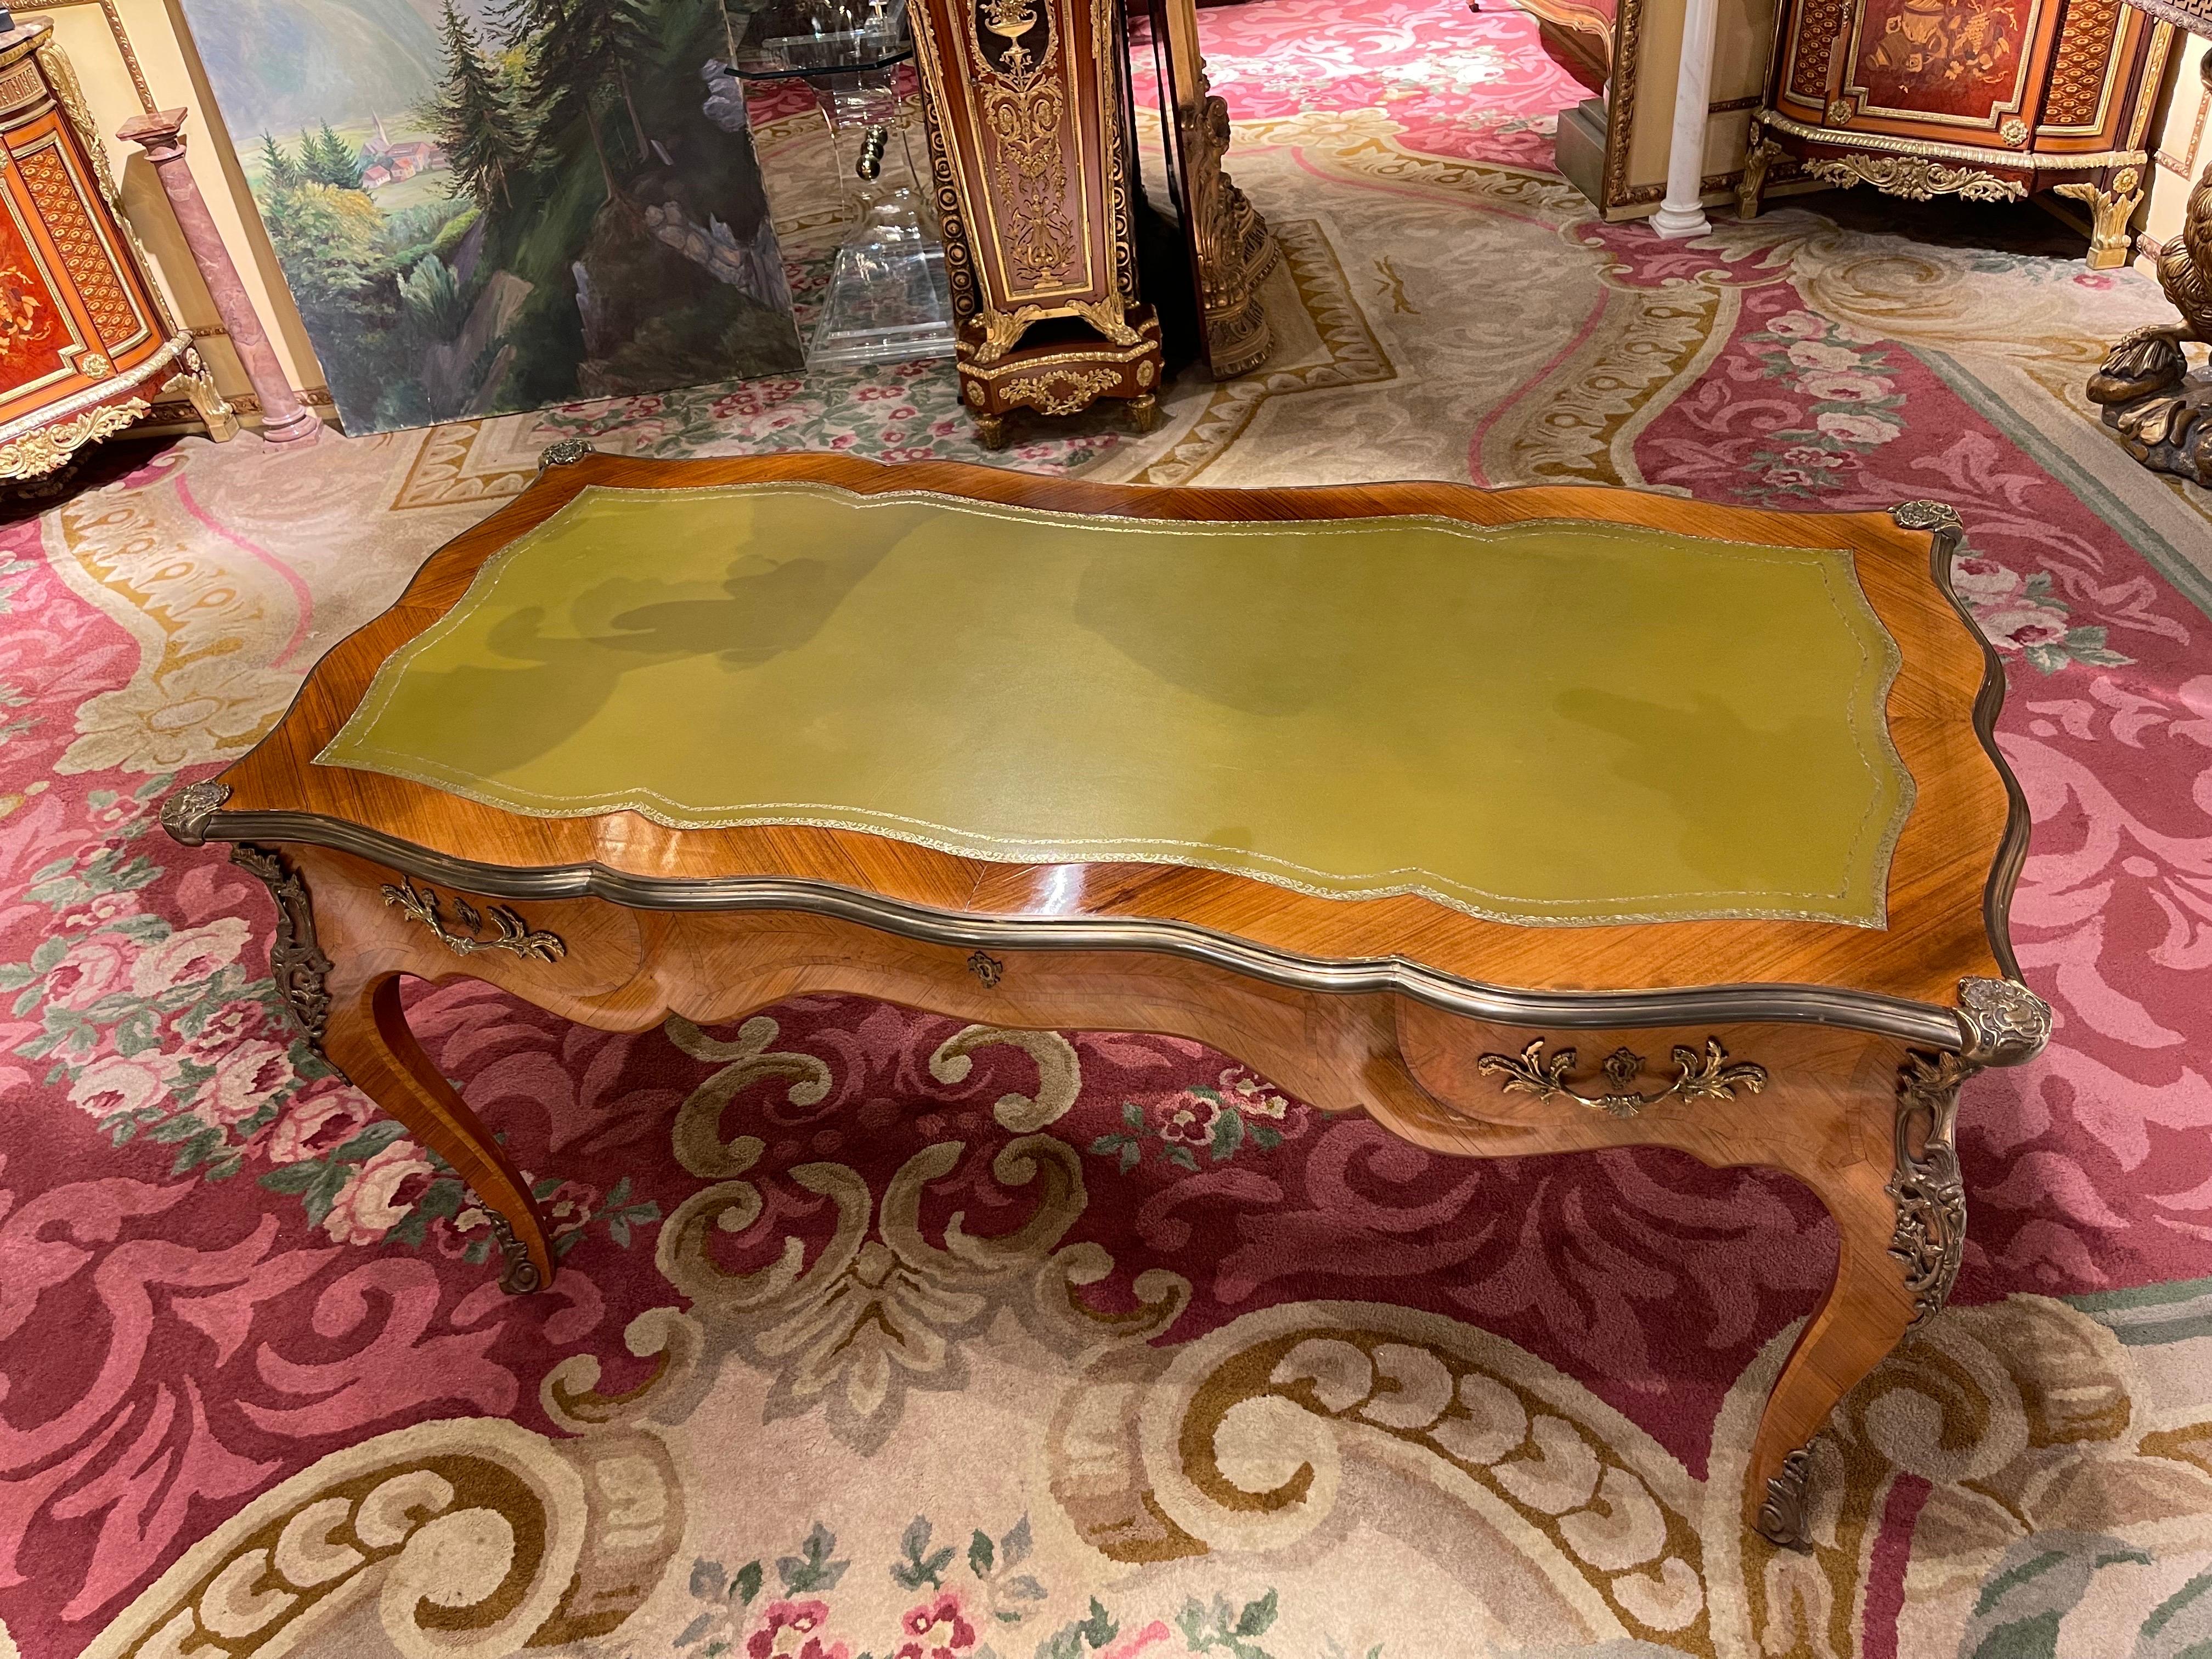 20th century French bureau plat/ writing desk 

In Bois Satiné veneer, mirror veneer covering all sides with rocaille applications. Edged with extremely finely chiselled, extremely decorative, restrained bronze fittings. Tulip veneer on solid